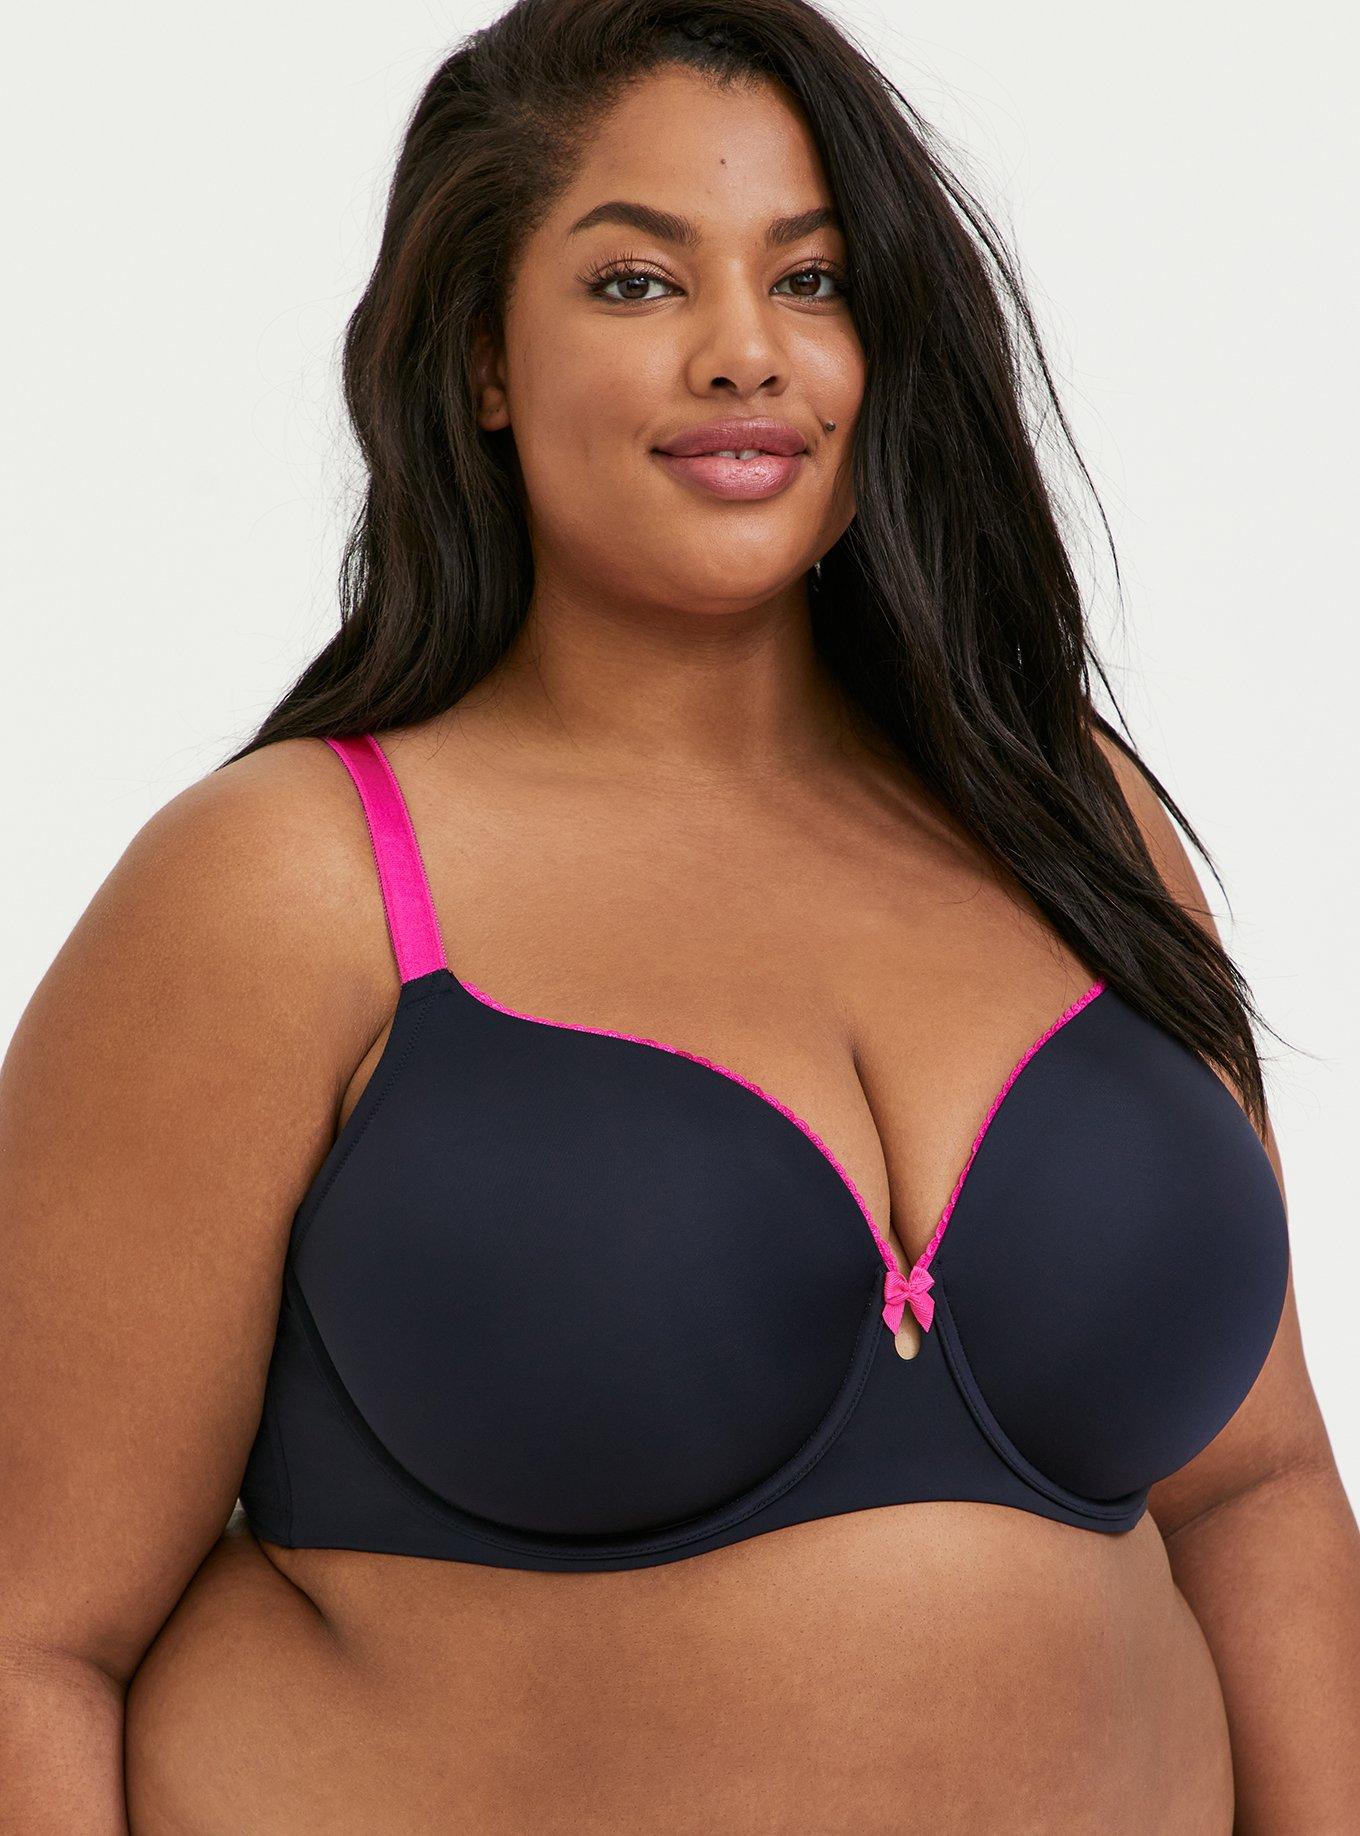 Torrid Curve 42B Pink Lightly Lined No Wire Bra Size 42 B - $21